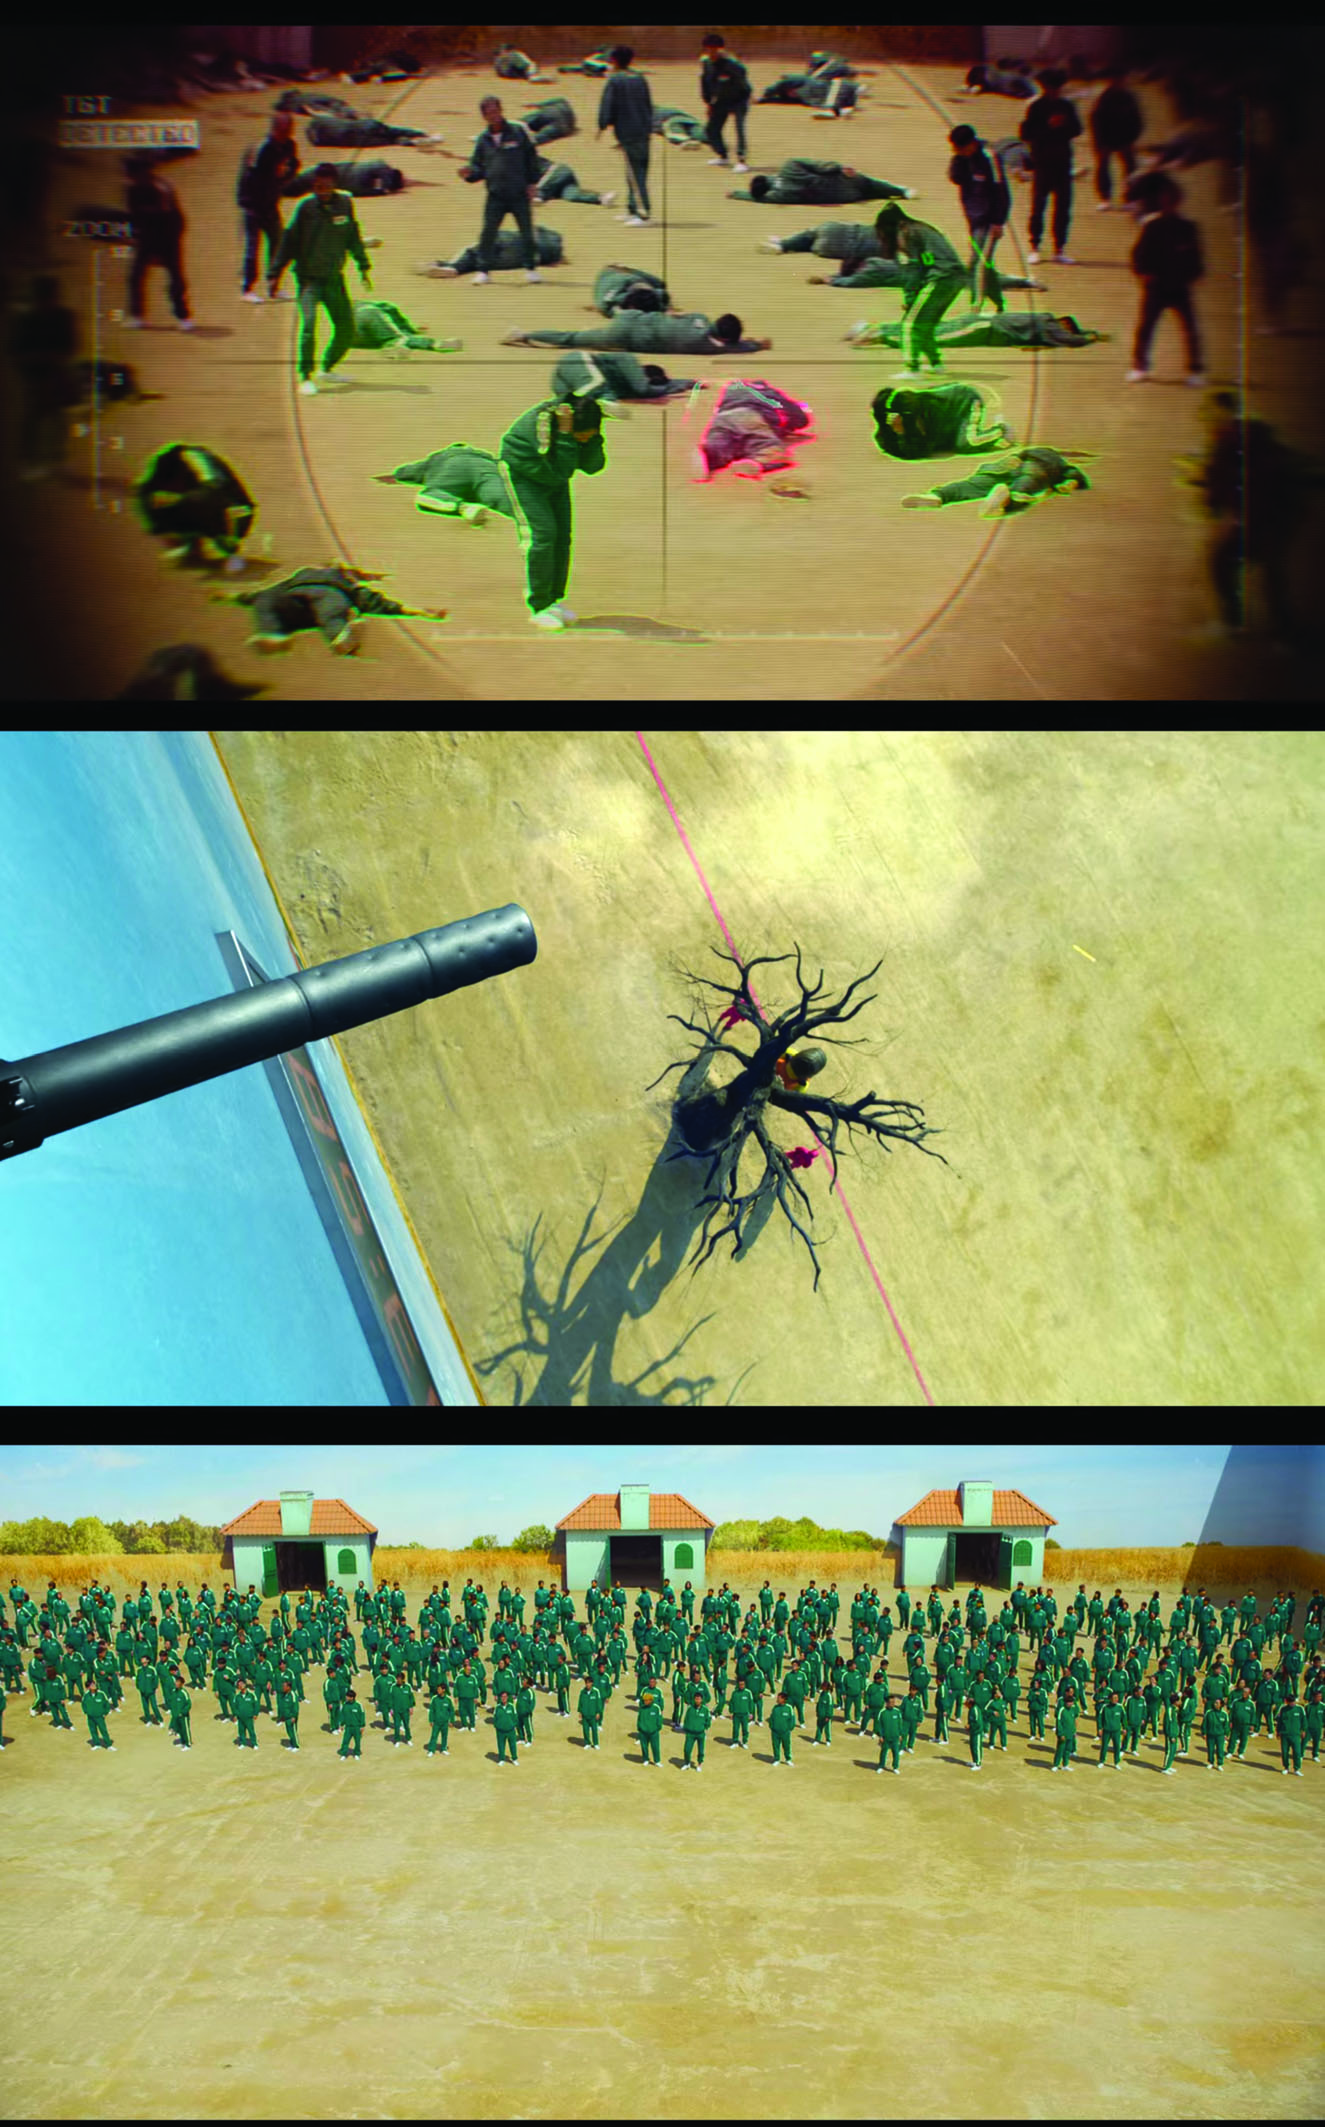 A collage of three images. The top shows a crosshair view of multiple individuals lying on the ground or standing in an array of positions. The middle shows a gun barrel sticking out of the wall above an animatronic doll next to a tree. The bottom shows a bird’s-eye view of a large crowd donning green uniforms with three open gates behind them on a sandy playground.